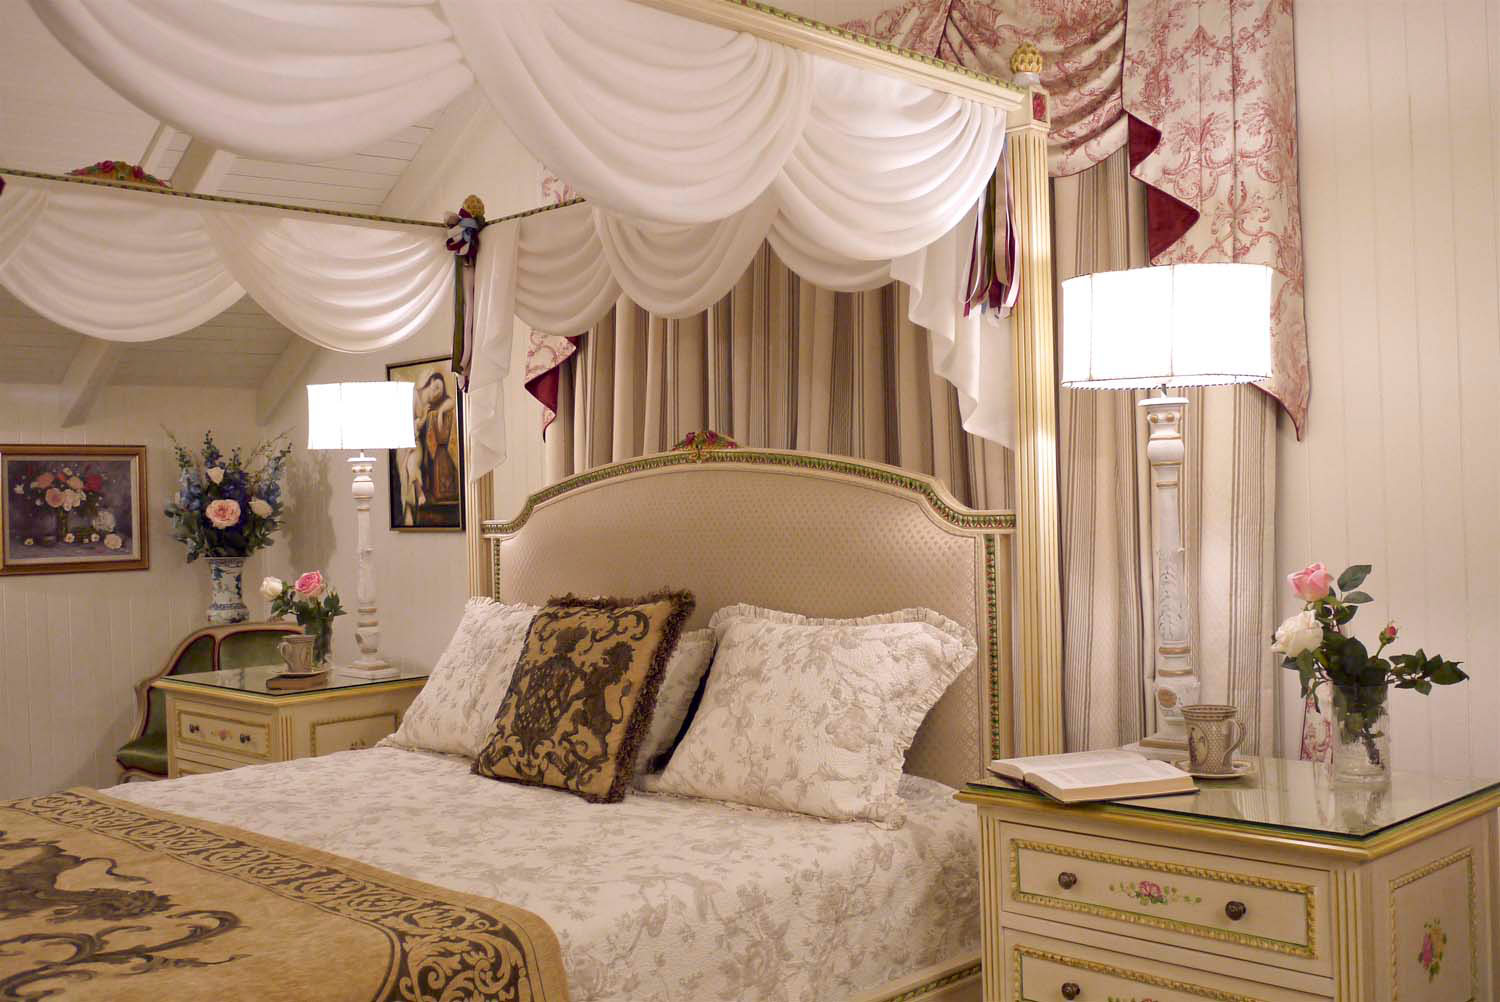 8 Bedroom with handpainted finishes and matching drapes, décor, lights and fabrics